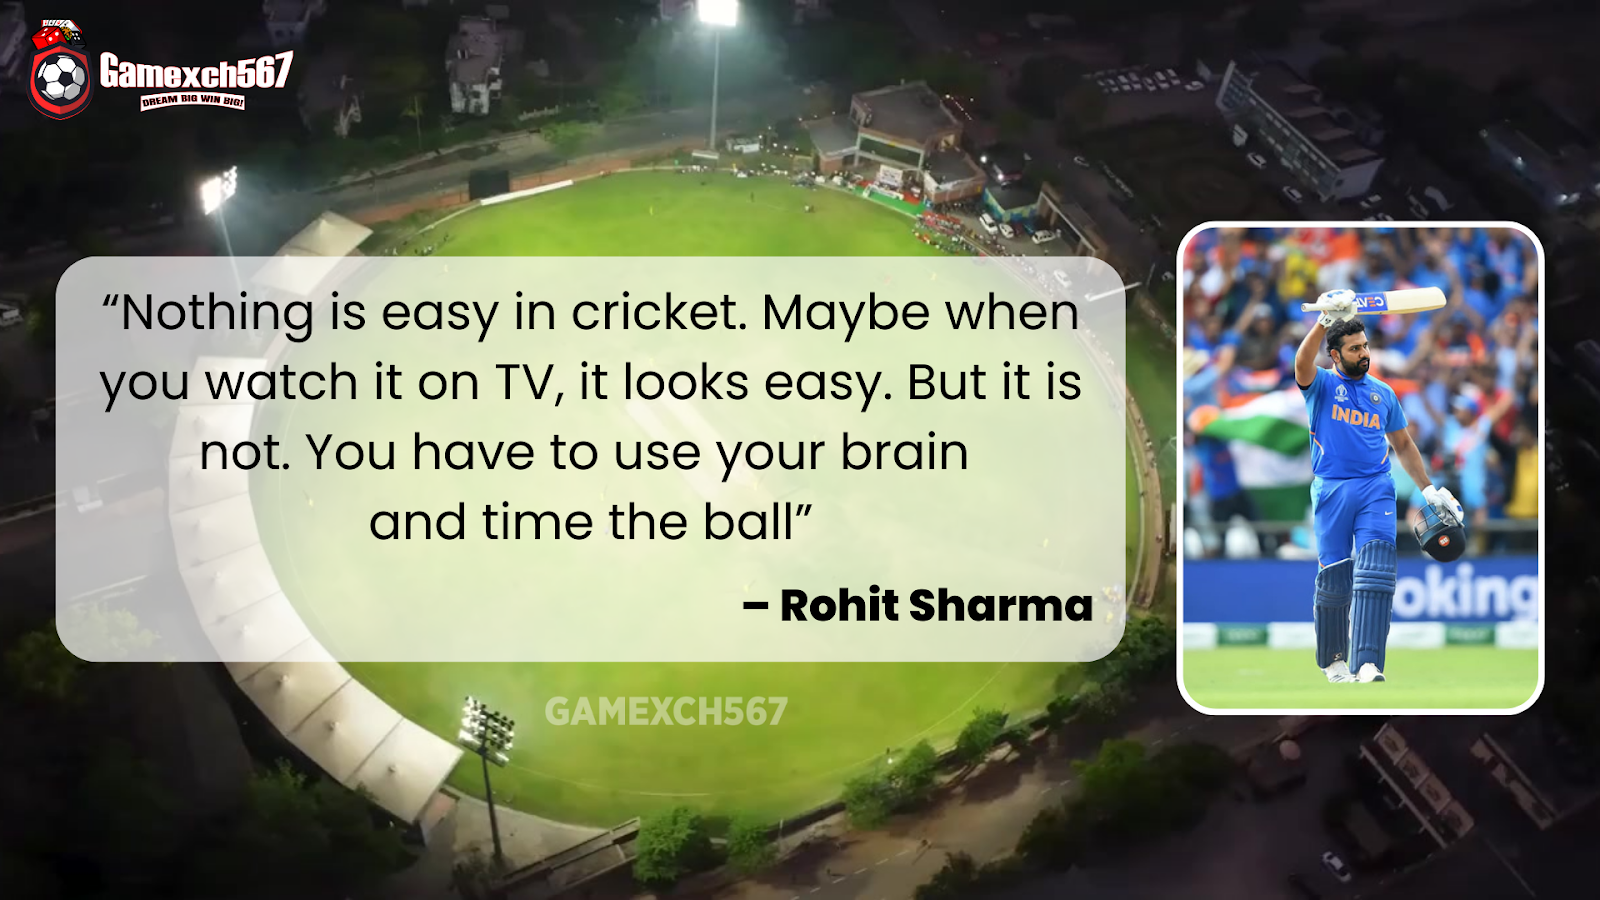 “Nothing is easy in cricket. Maybe when you watch it on TV, it looks easy. But it is not. You have to use your brain and time the ball” – Rohit Sharma